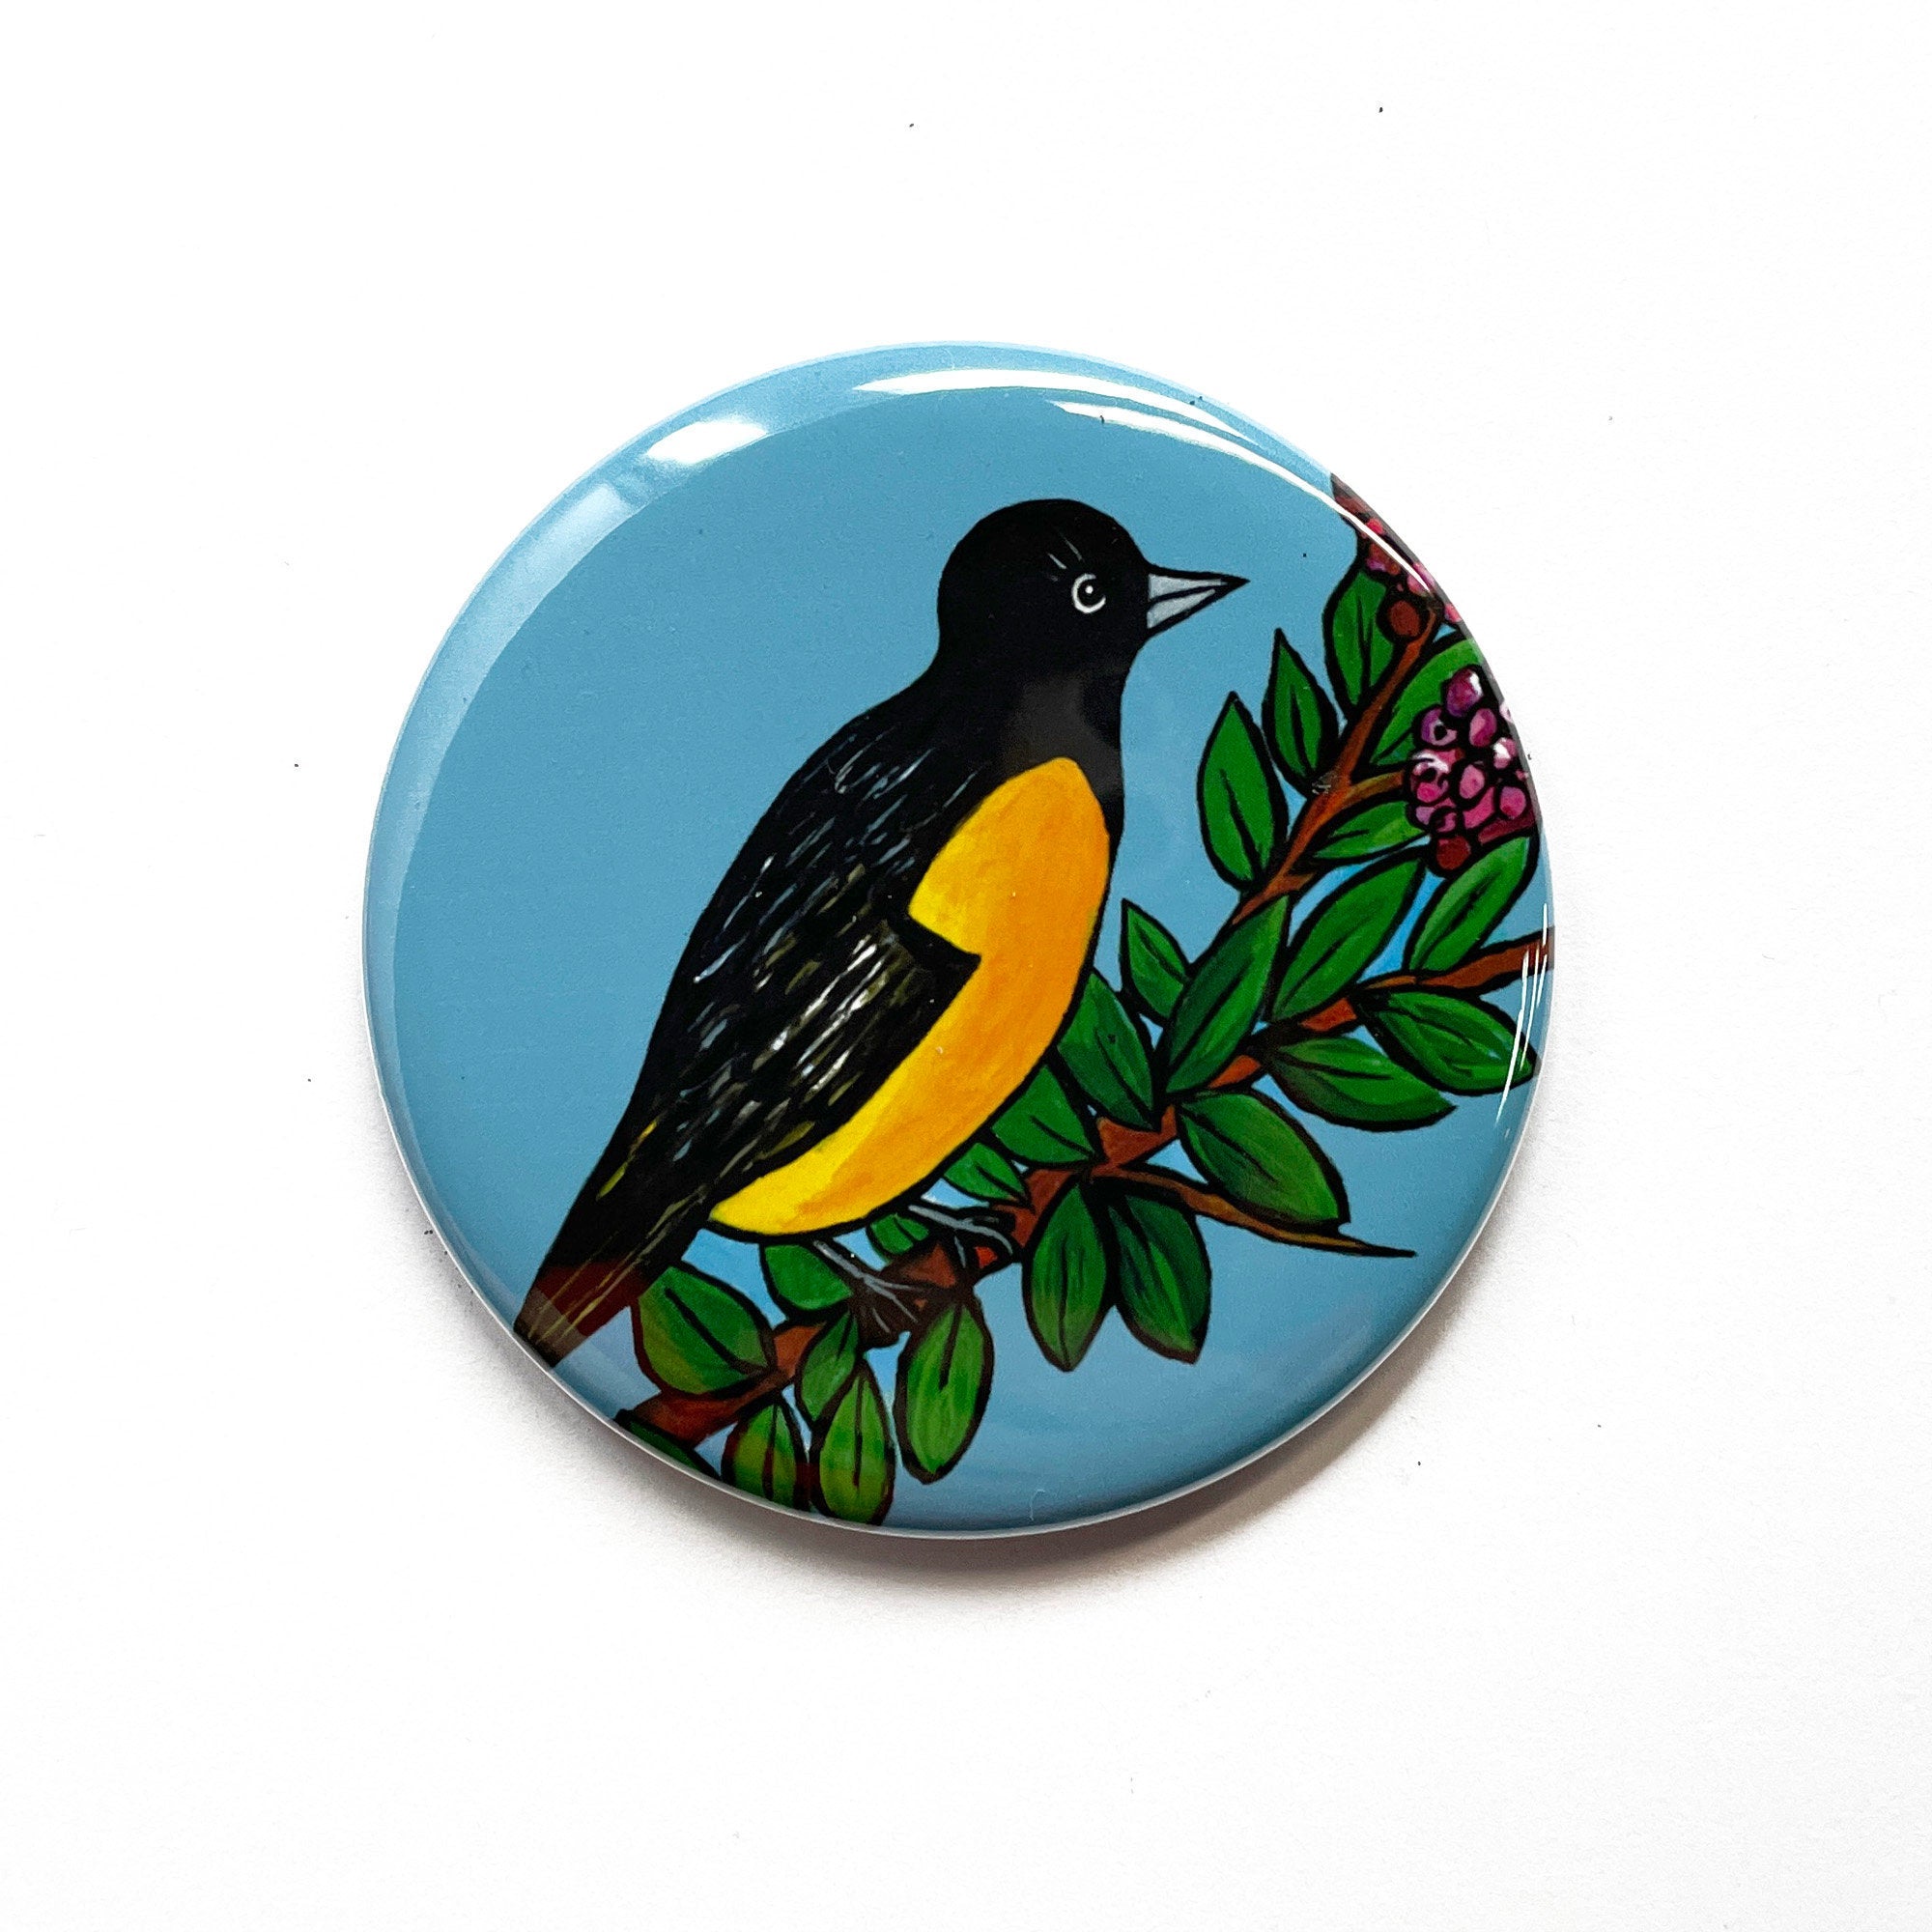 Oriole Magnet, Pin Back Button, or Pocket Mirror - Cute Bird Magnet or Pinback Badge